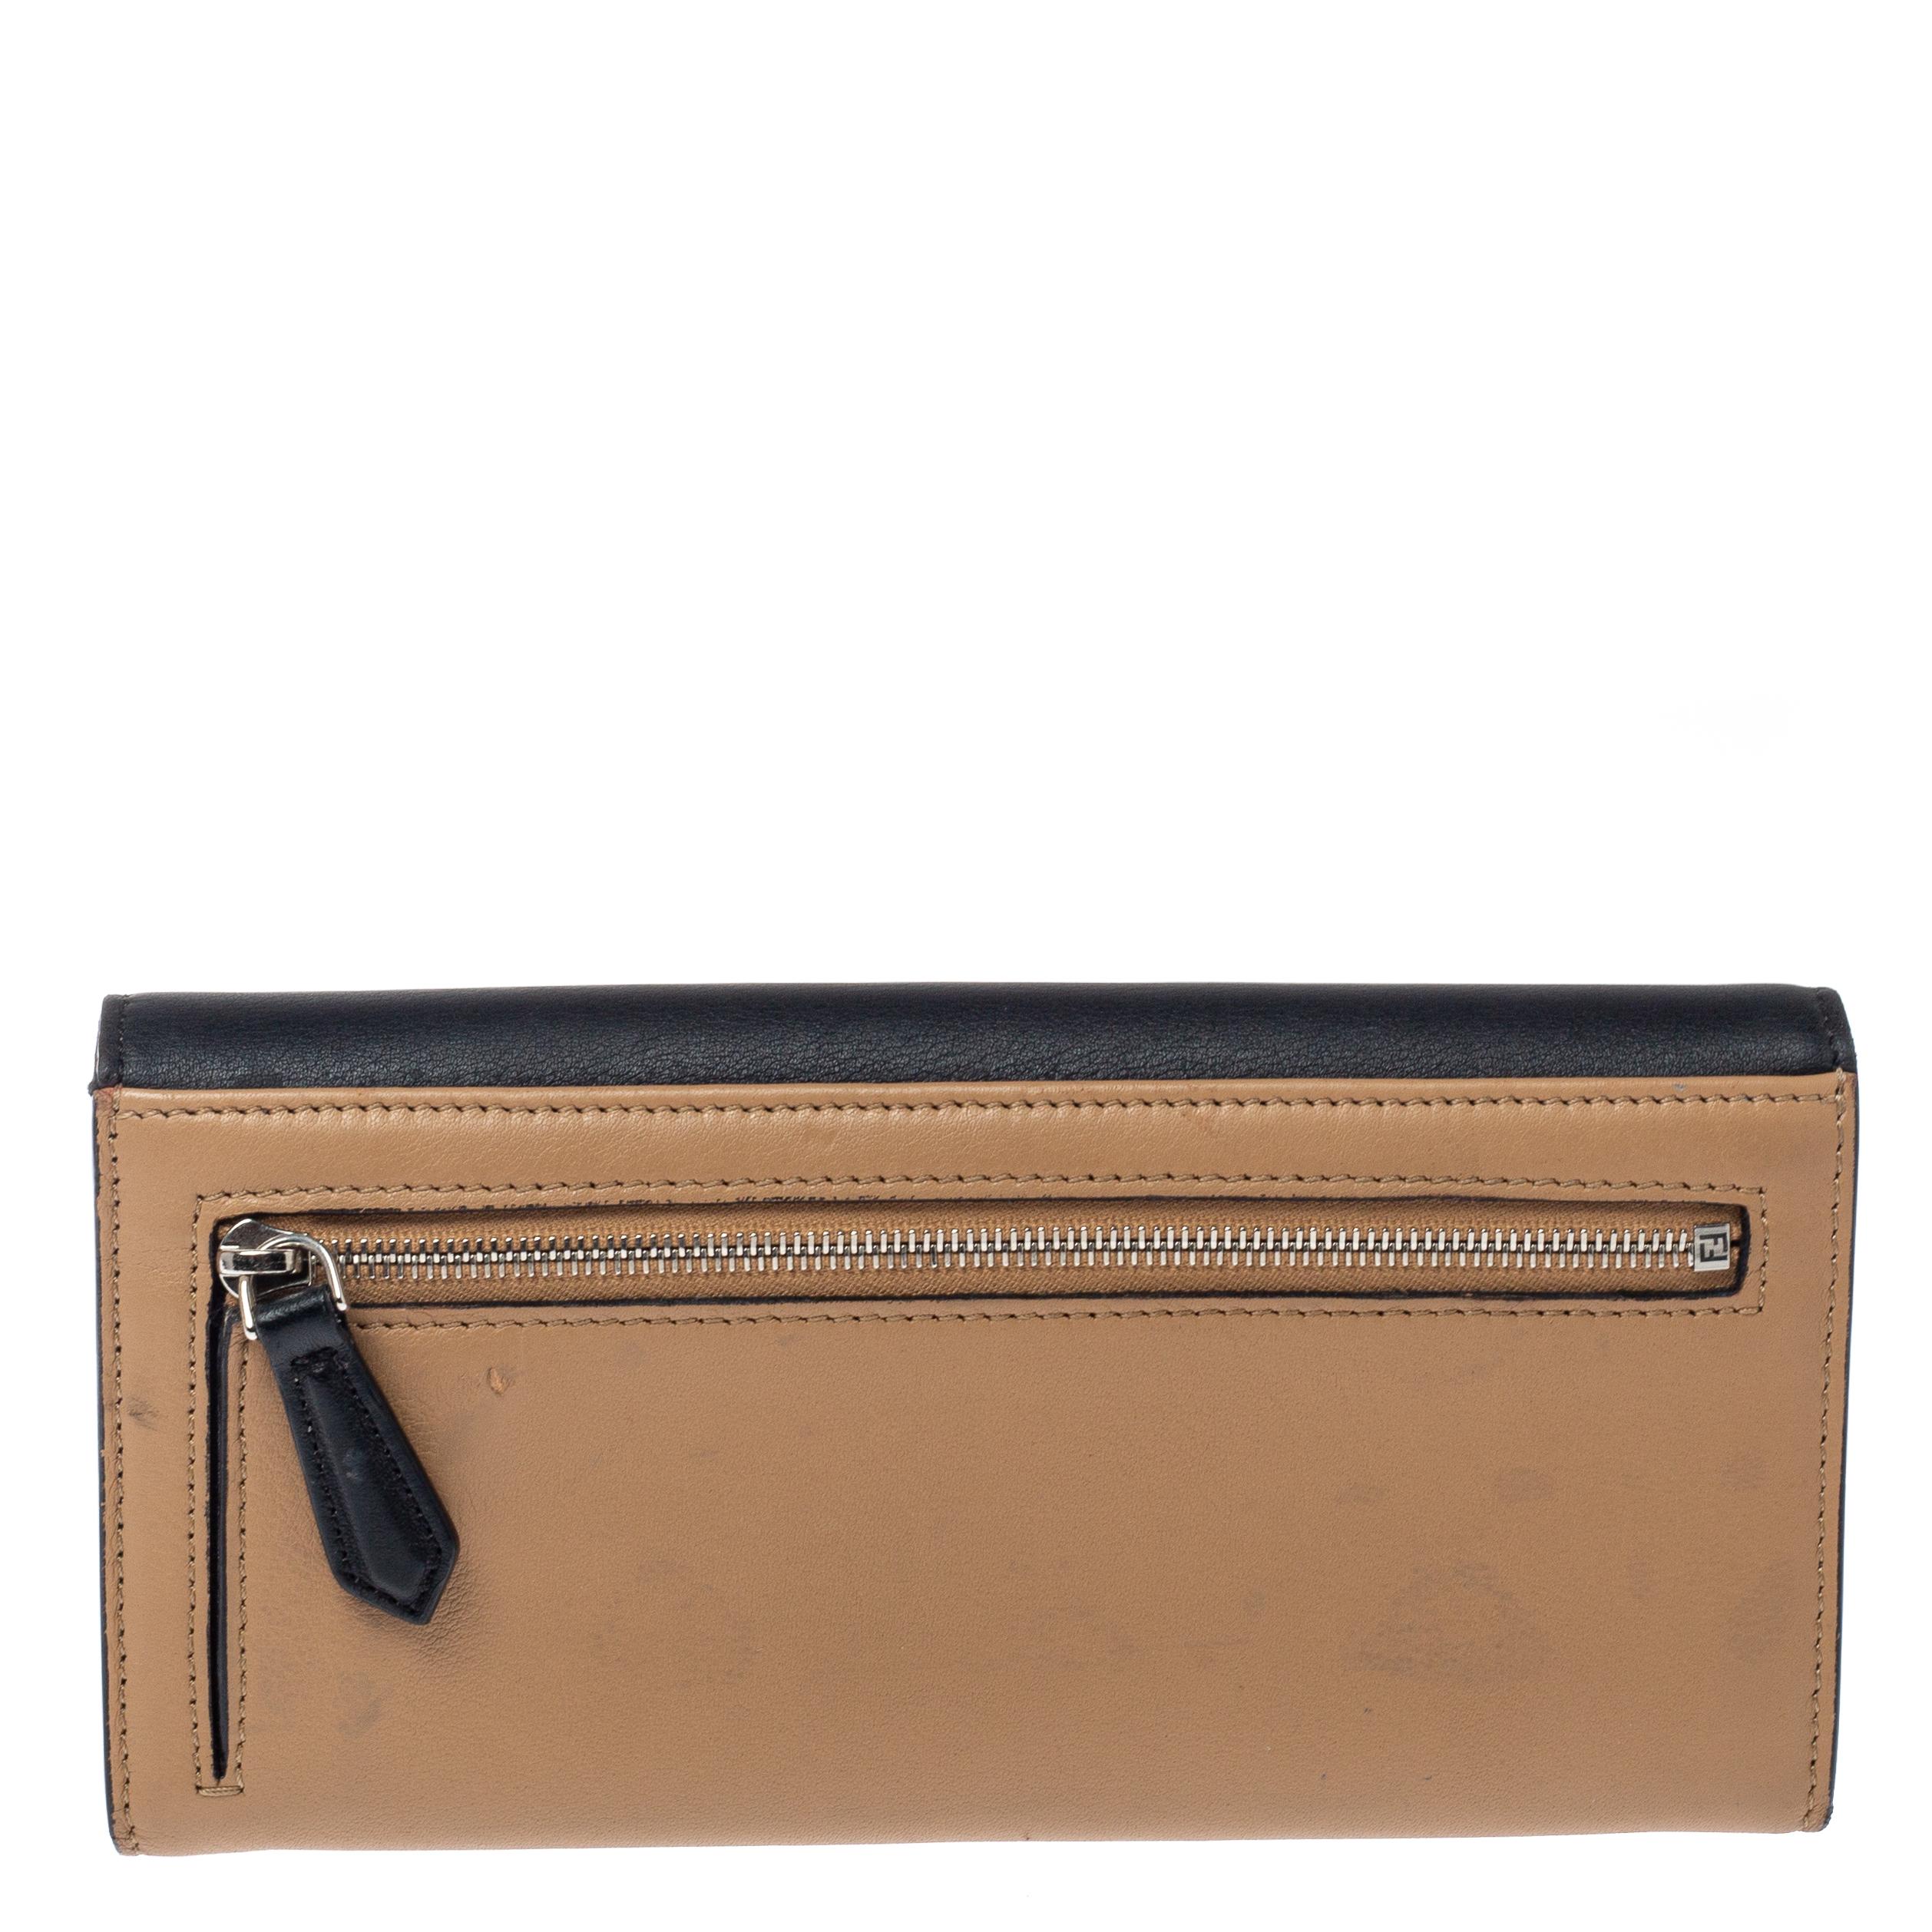 How cute does this continental wallet from Fendi look! In lovely shades, this wallet is crafted from leather and features an amazing silhouette that resembles that of an envelope. It flaunts a gold-tone brand logo detailing on the front flap